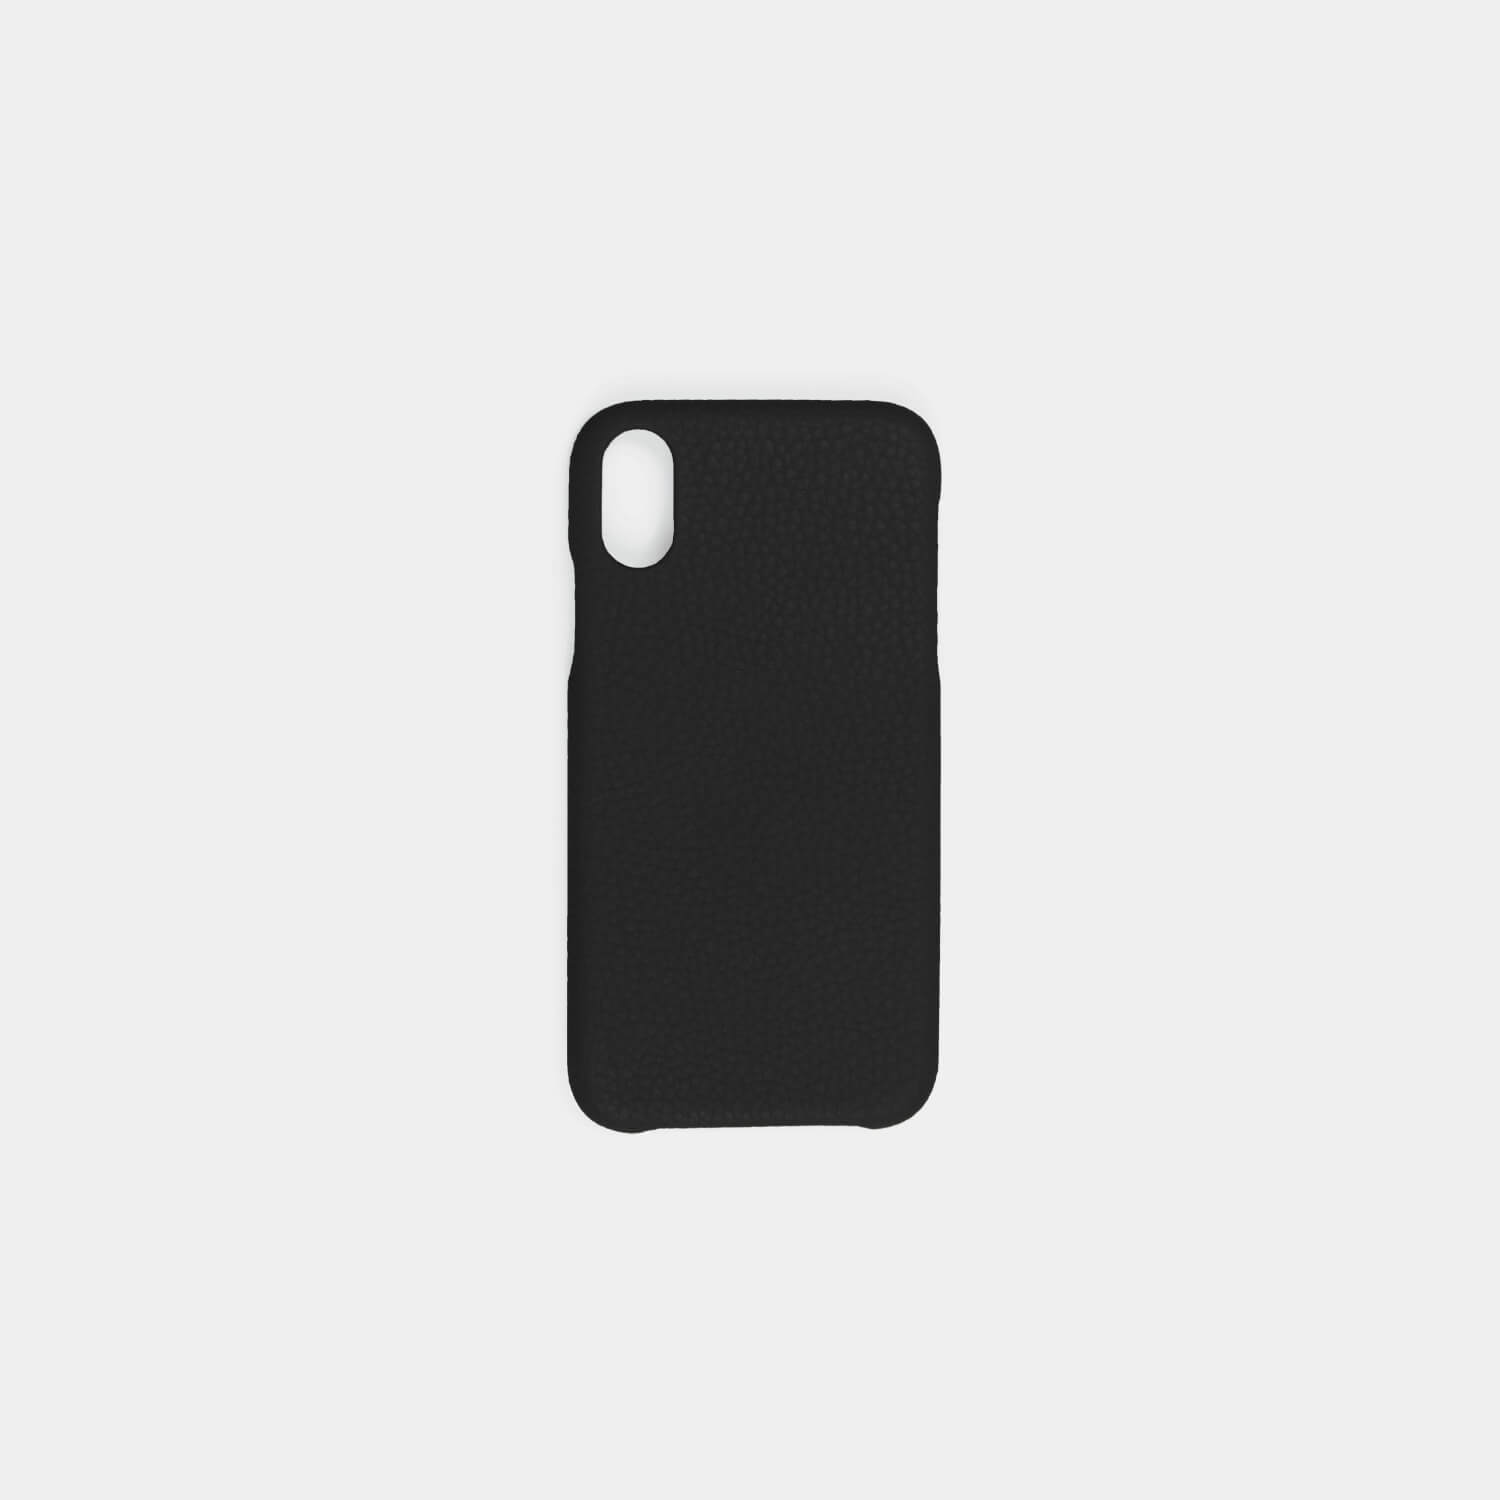 Pebble grain leather iPhone case for all models, moulds to the case to protect the iPhone